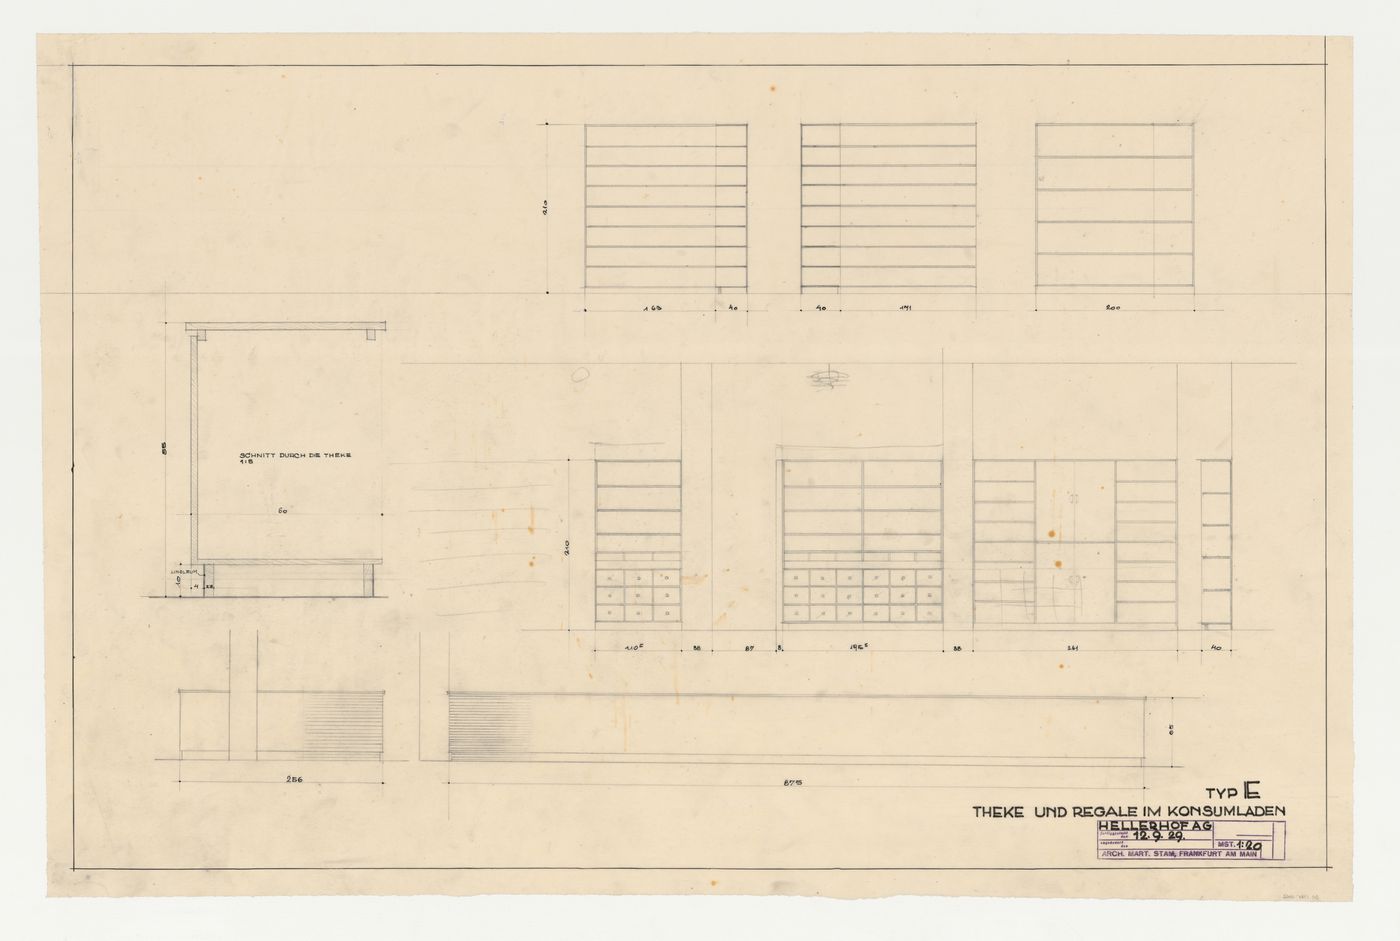 Elevations for a counter and shelves and section for a counter for a type E co-op store, Hellerhof Housing Estate, Frankfurt am Main, Germany